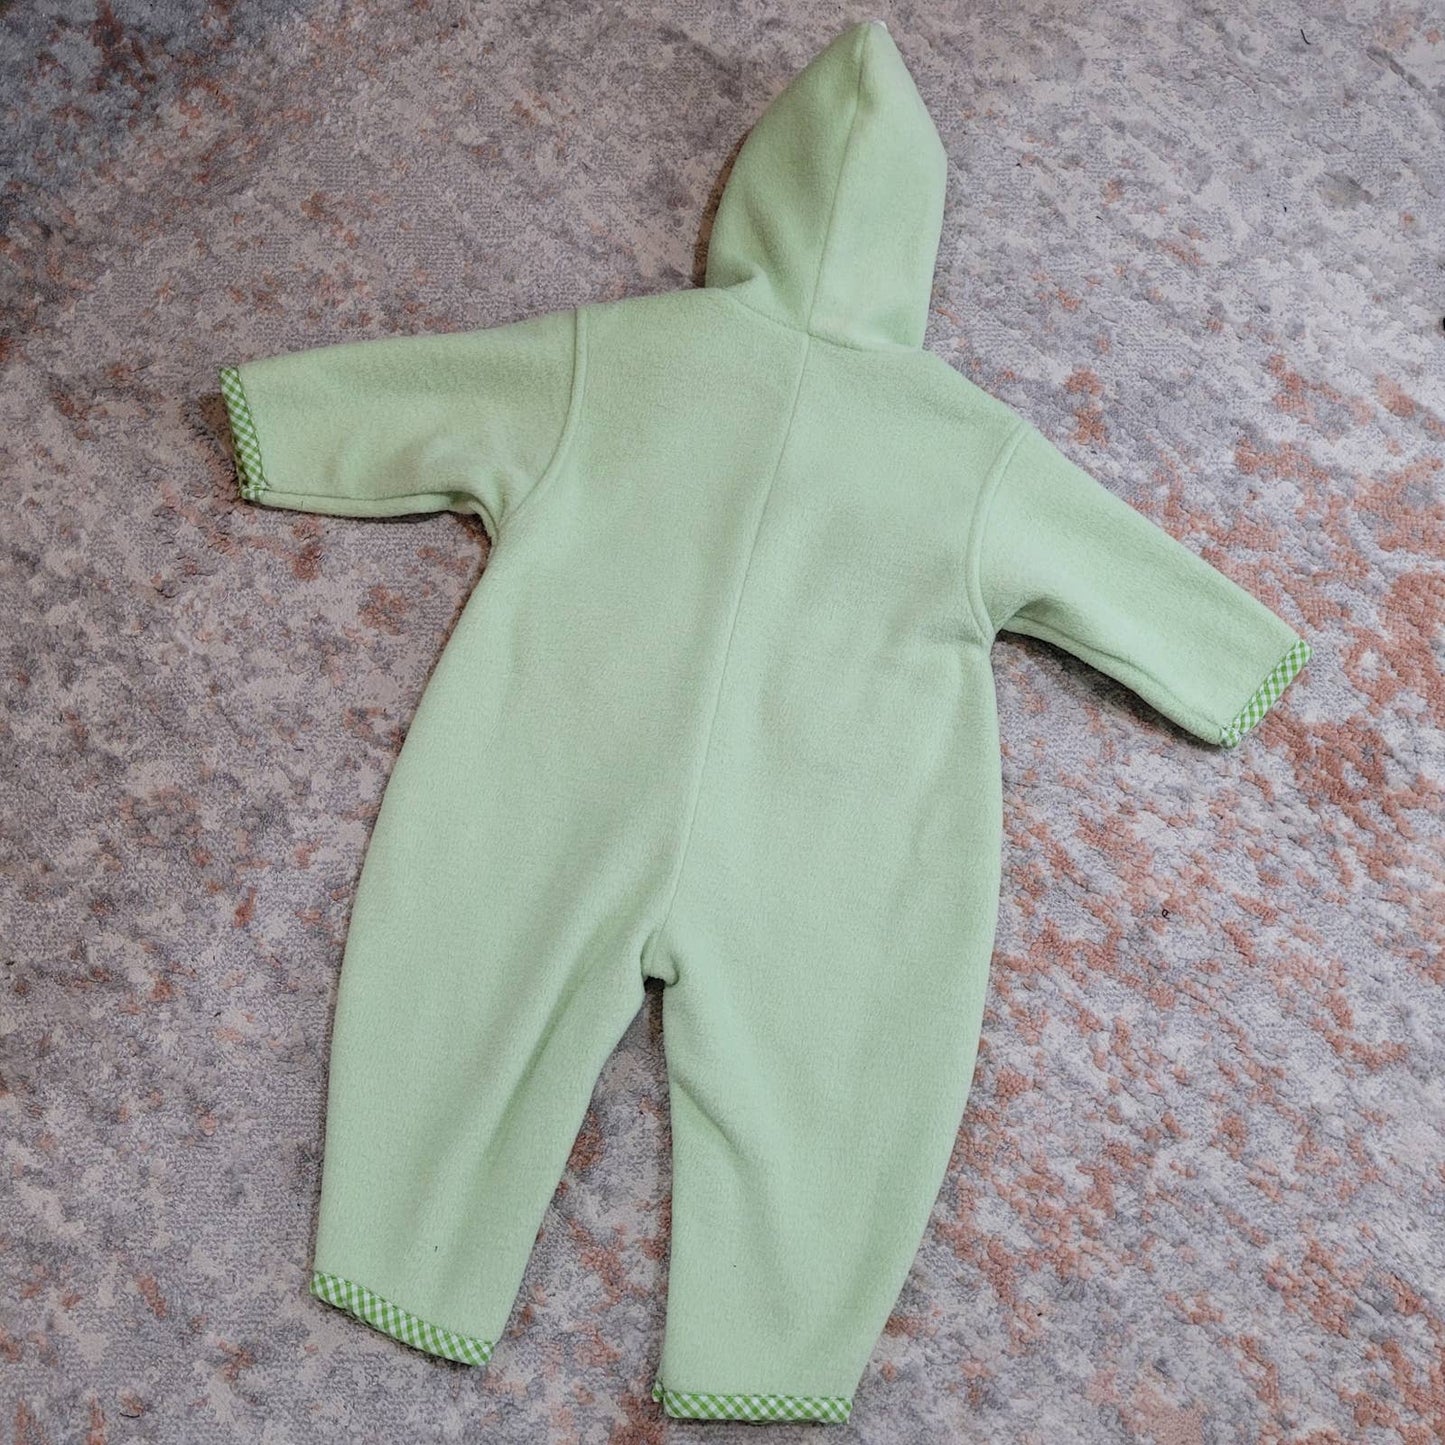 Baby Bell Green Fleece Jumpsuit with Puppy Design - Size 18M